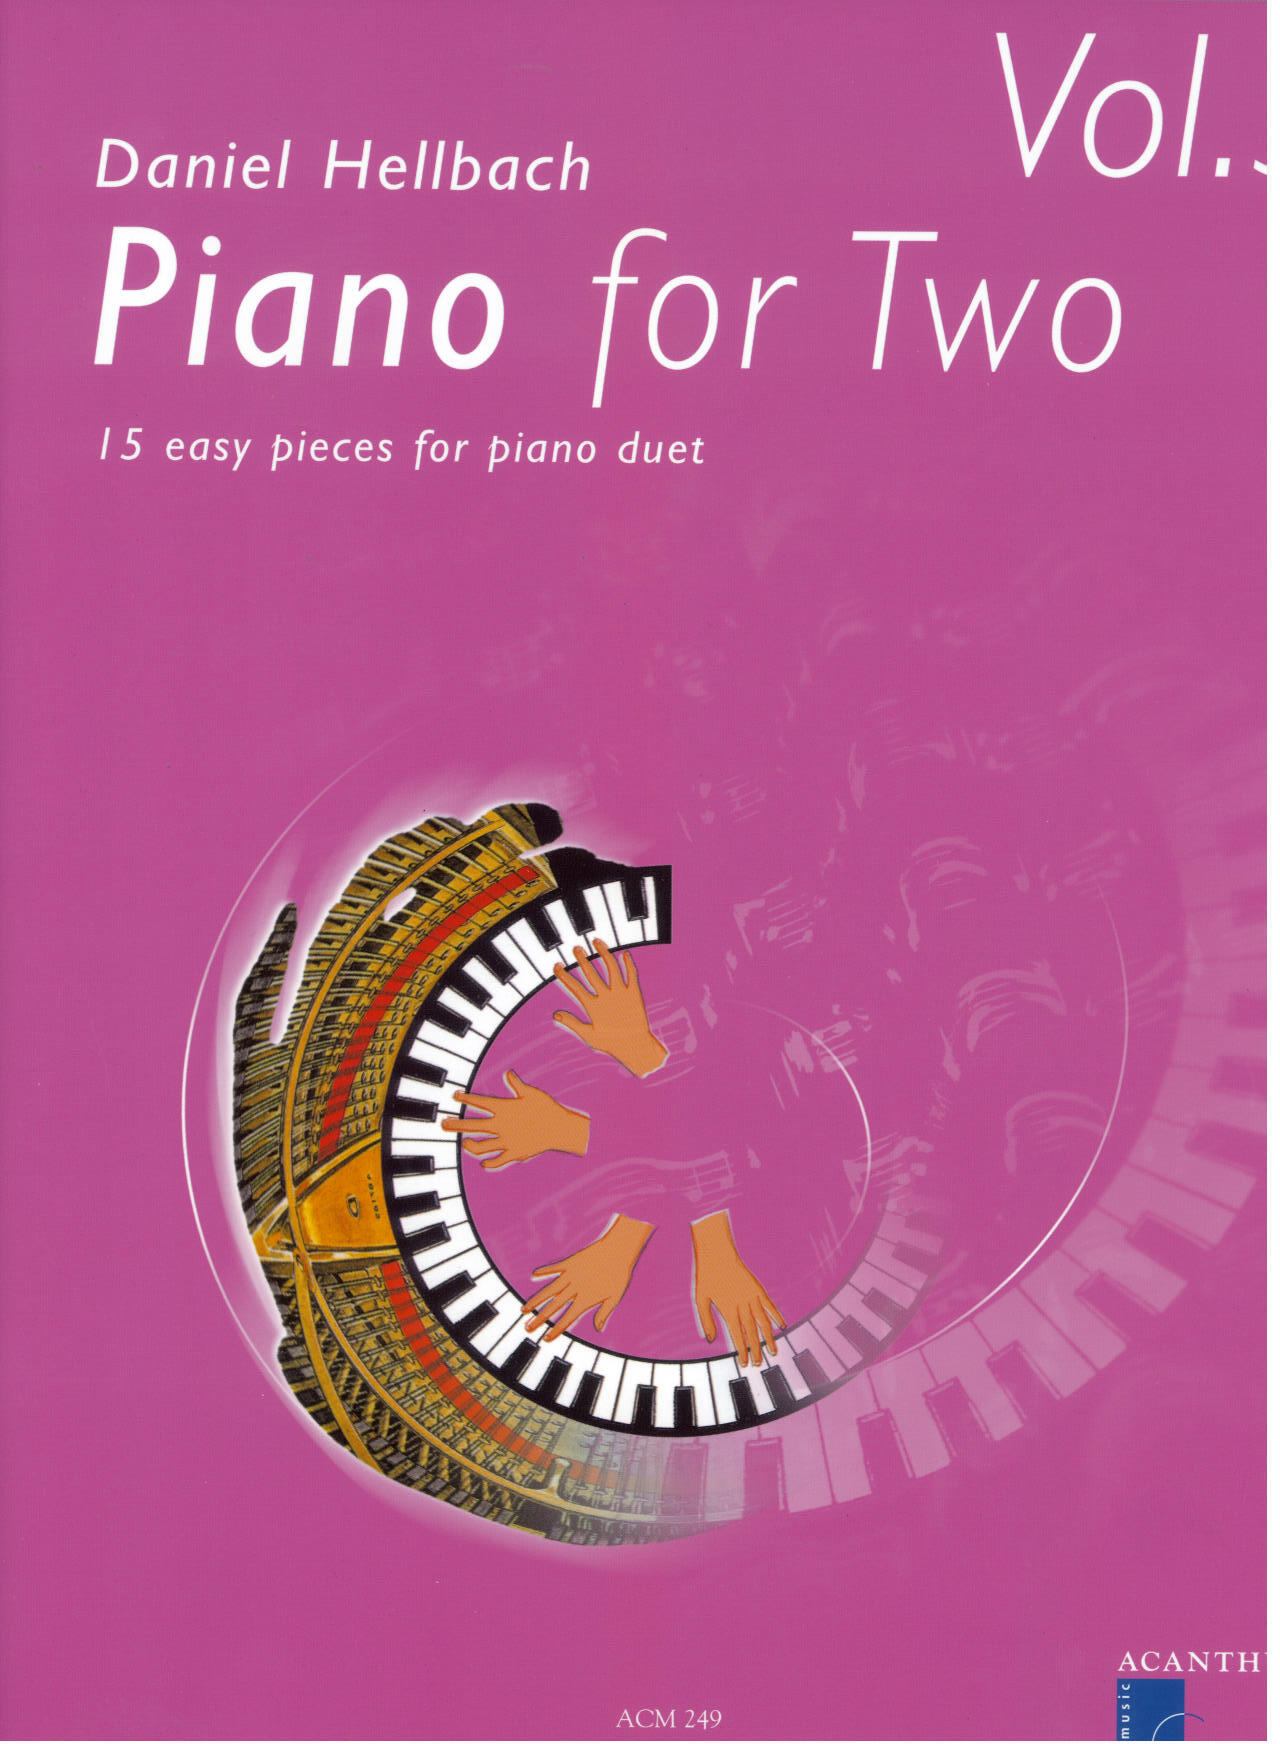 Piano for Two vol. 3 : photo 1